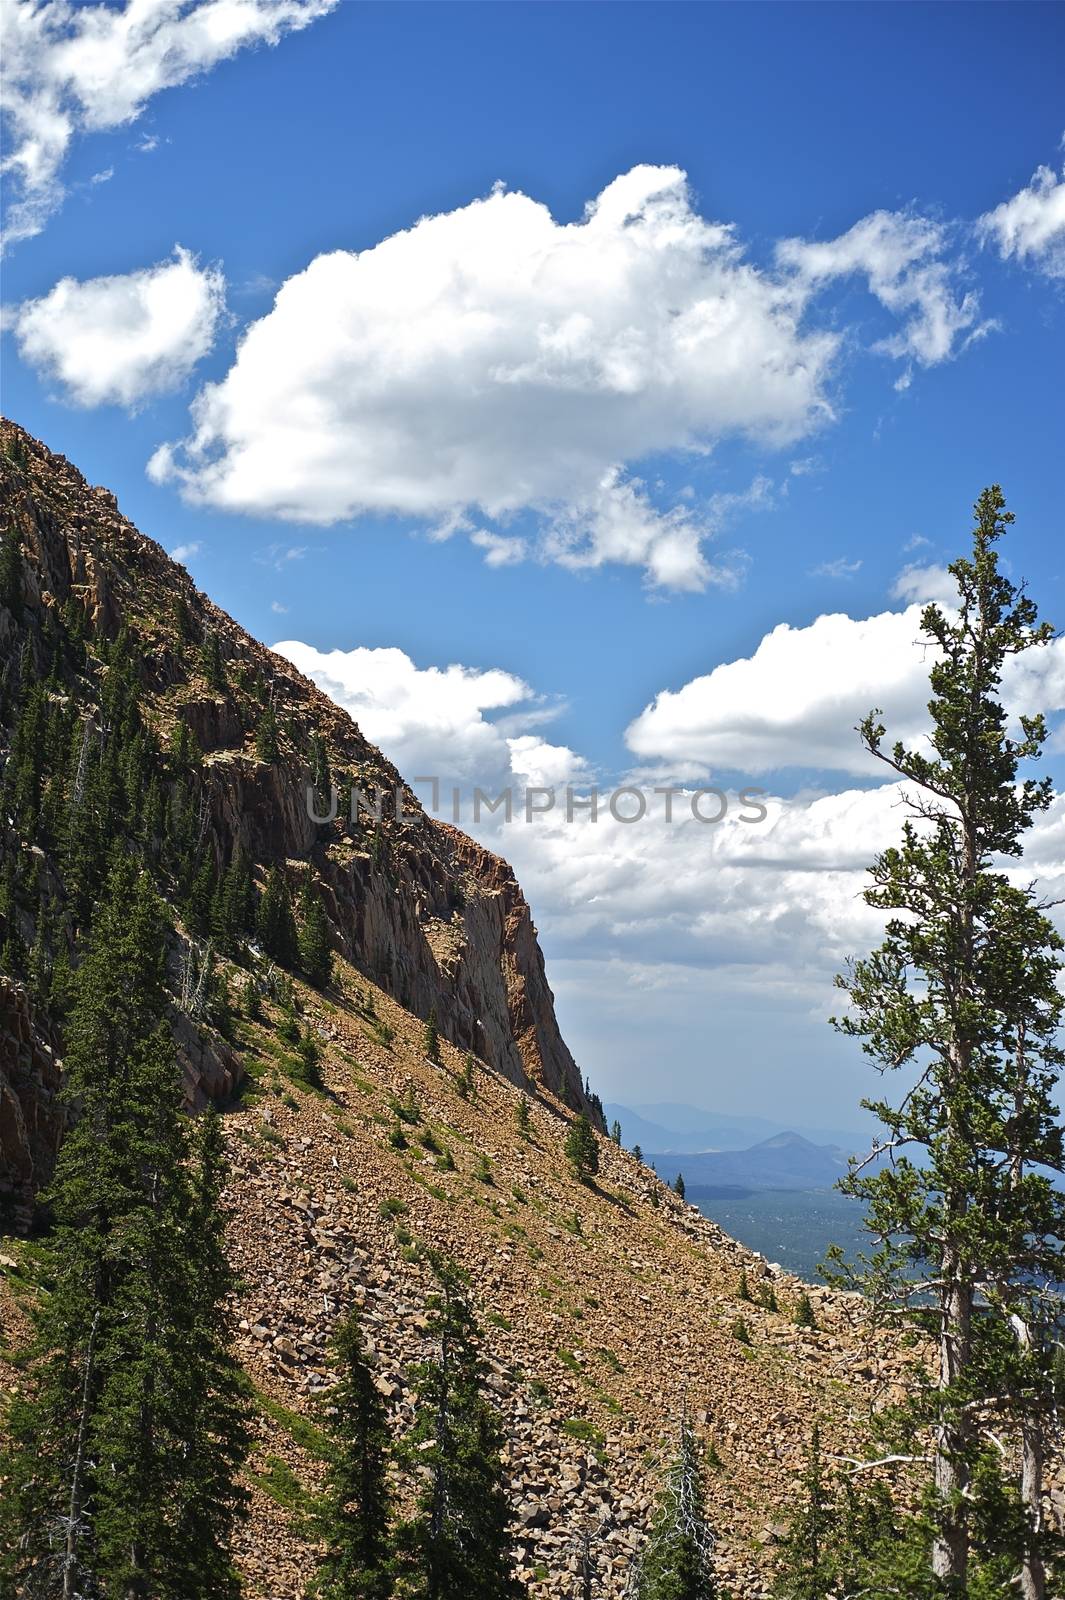 Colorado Springs - Pikes Peak Highway. Cloudy Blue Sky and Rocky Mountains.